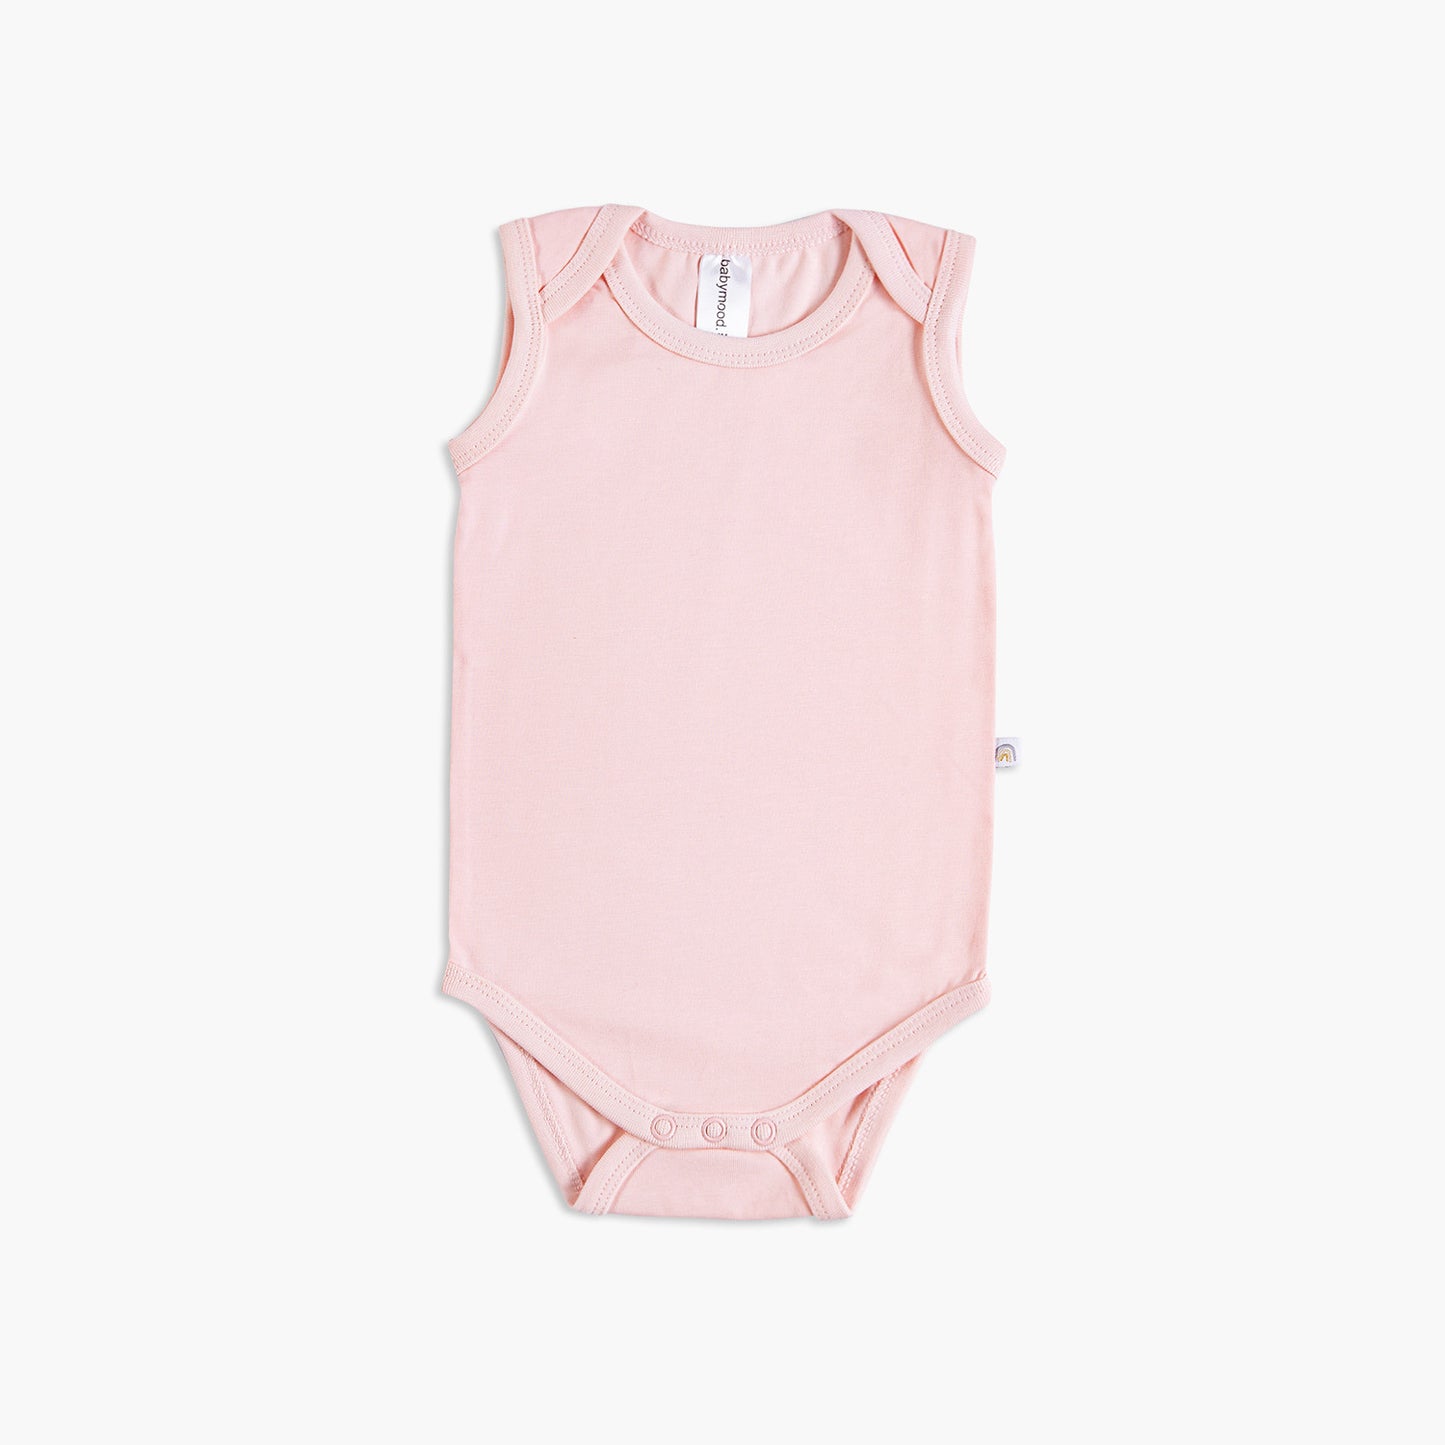 Body without sleeves, organic cotton GOTS, light pink